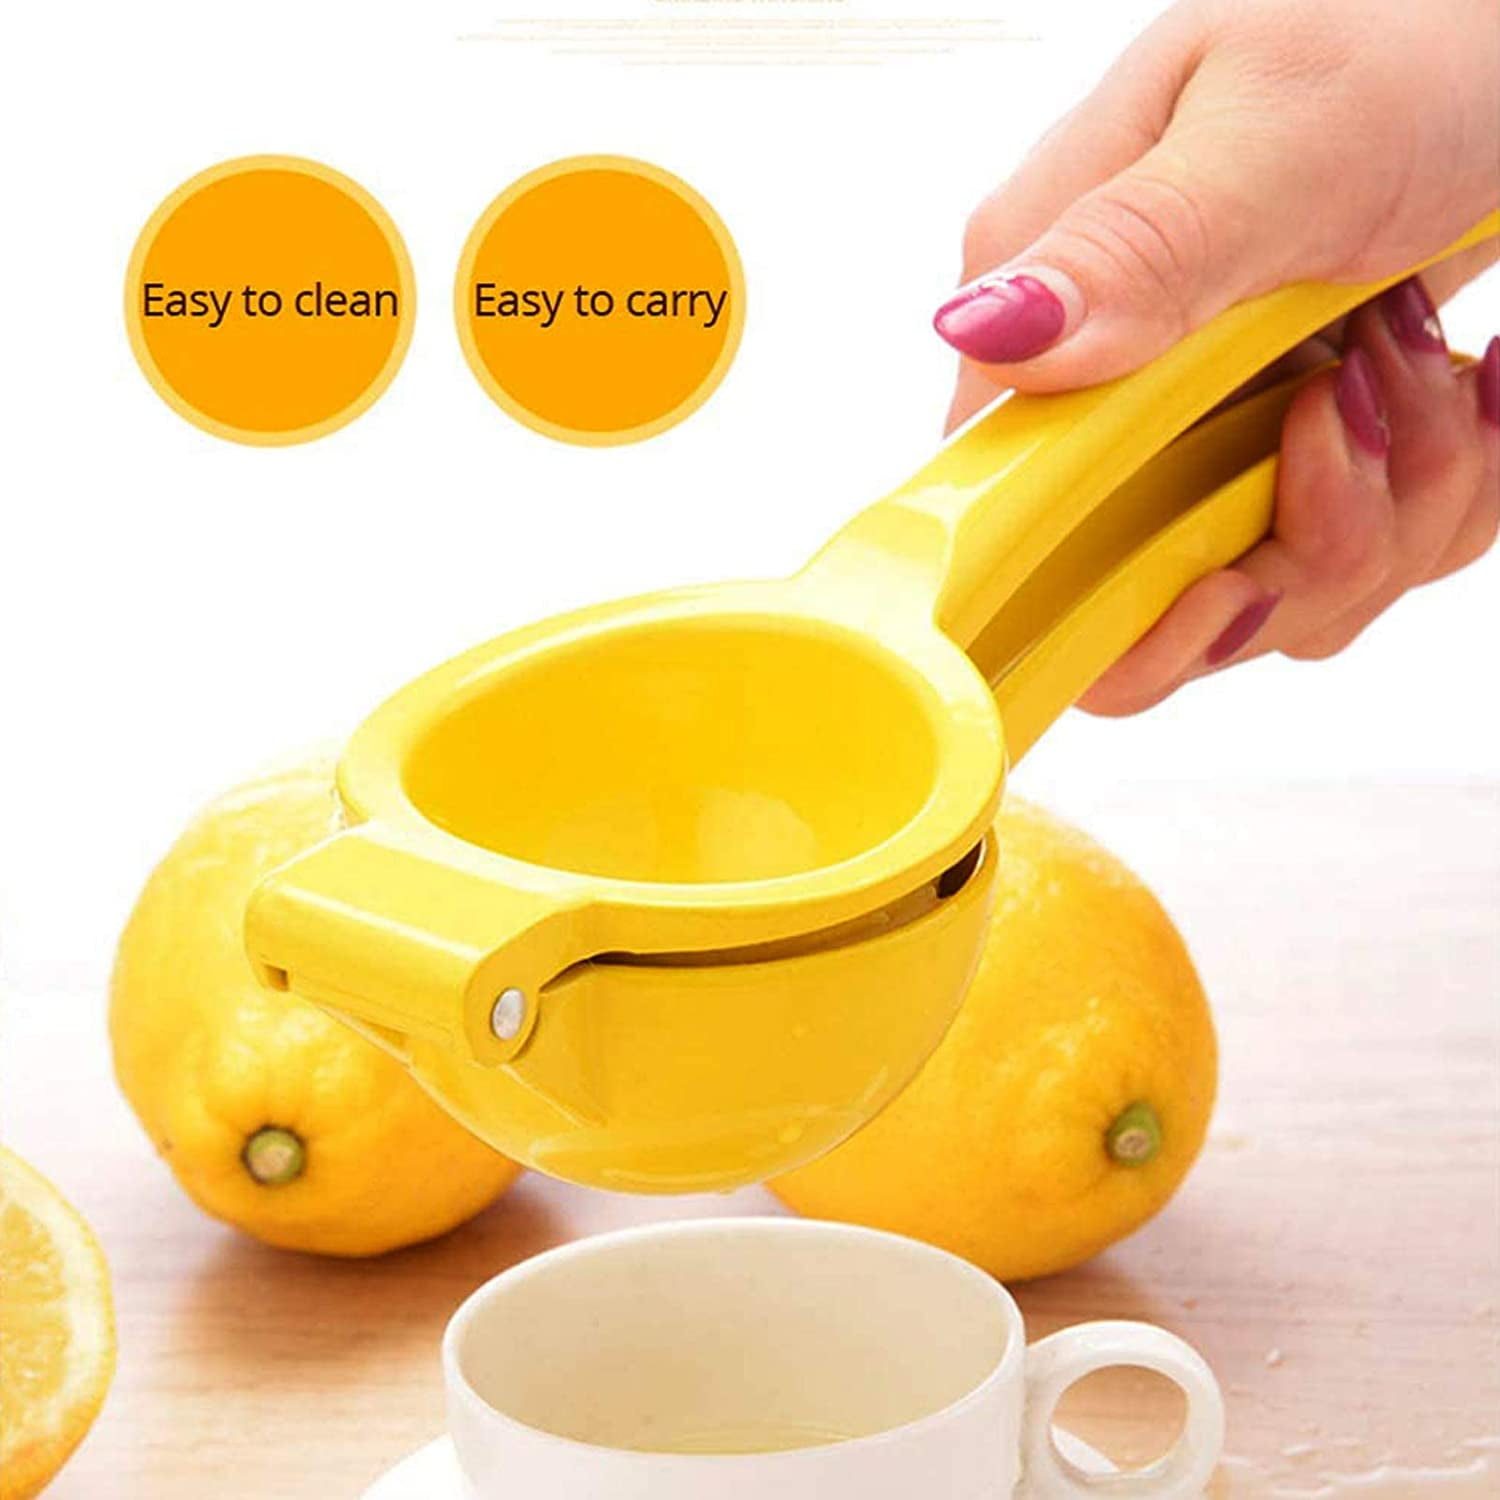 Yellow Lime Juice Press A-Yellow Premium Quality Metal Lemon Squeezer Manual Press Citrus Juicer For Squeeze The Freshest Juice